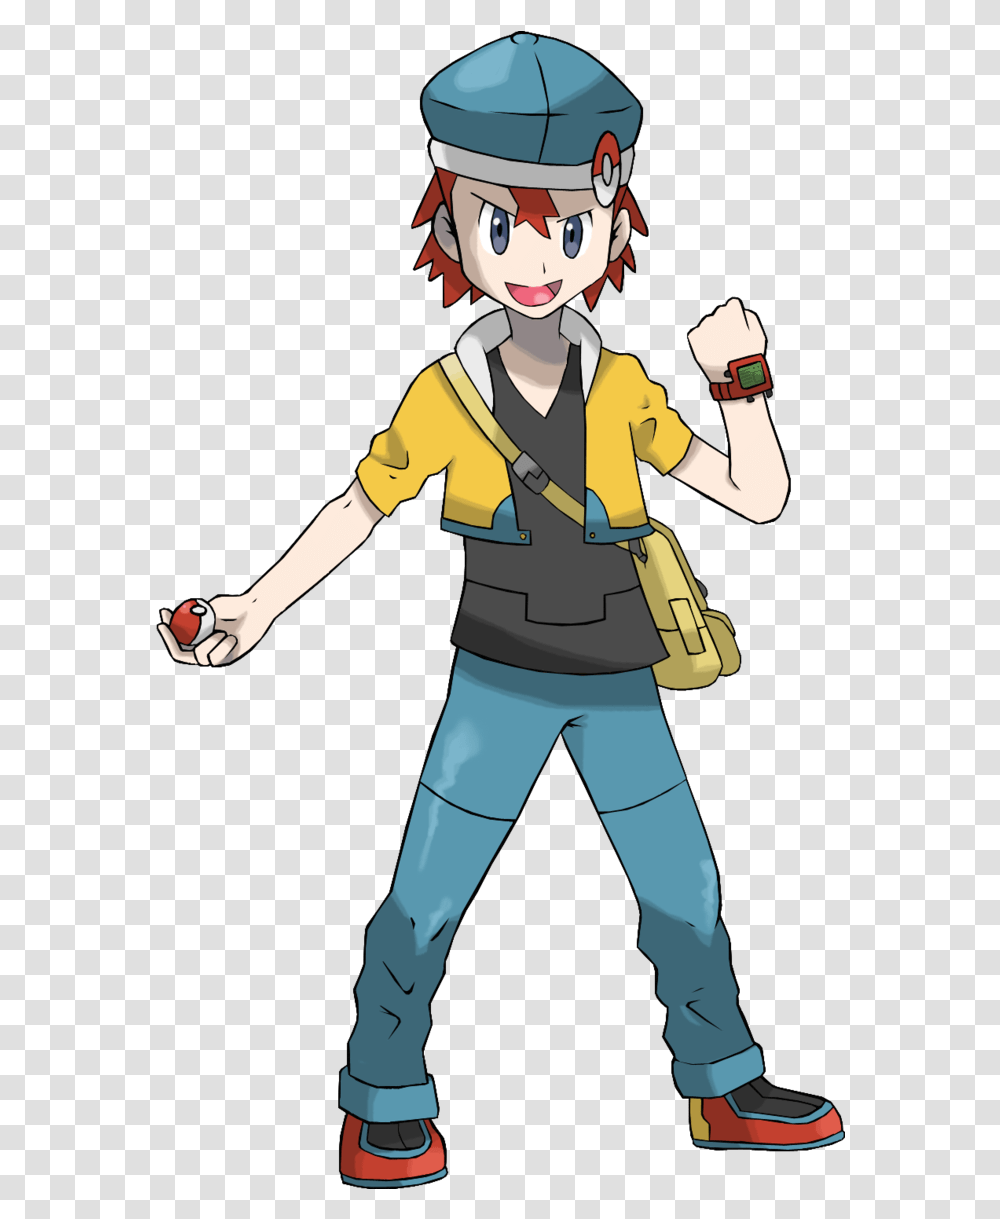 Download Hd Pokemon Trainer Rp Images Pokemon Trainer Fan Art, Person, Helmet, Clothing, Video Gaming Transparent Png